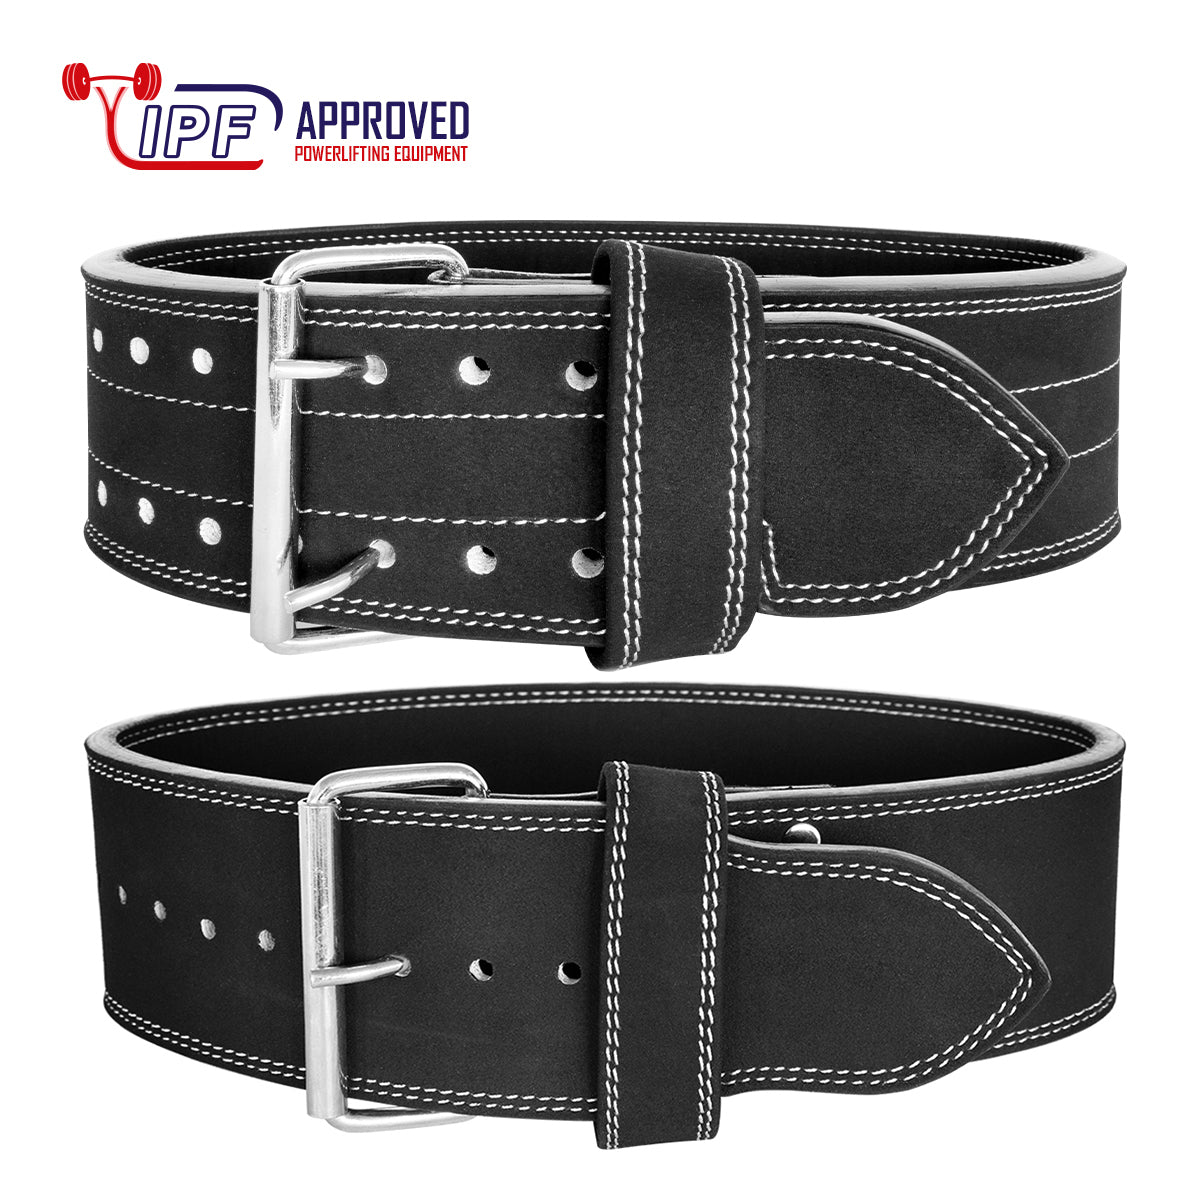 Single and Double Prong Belts